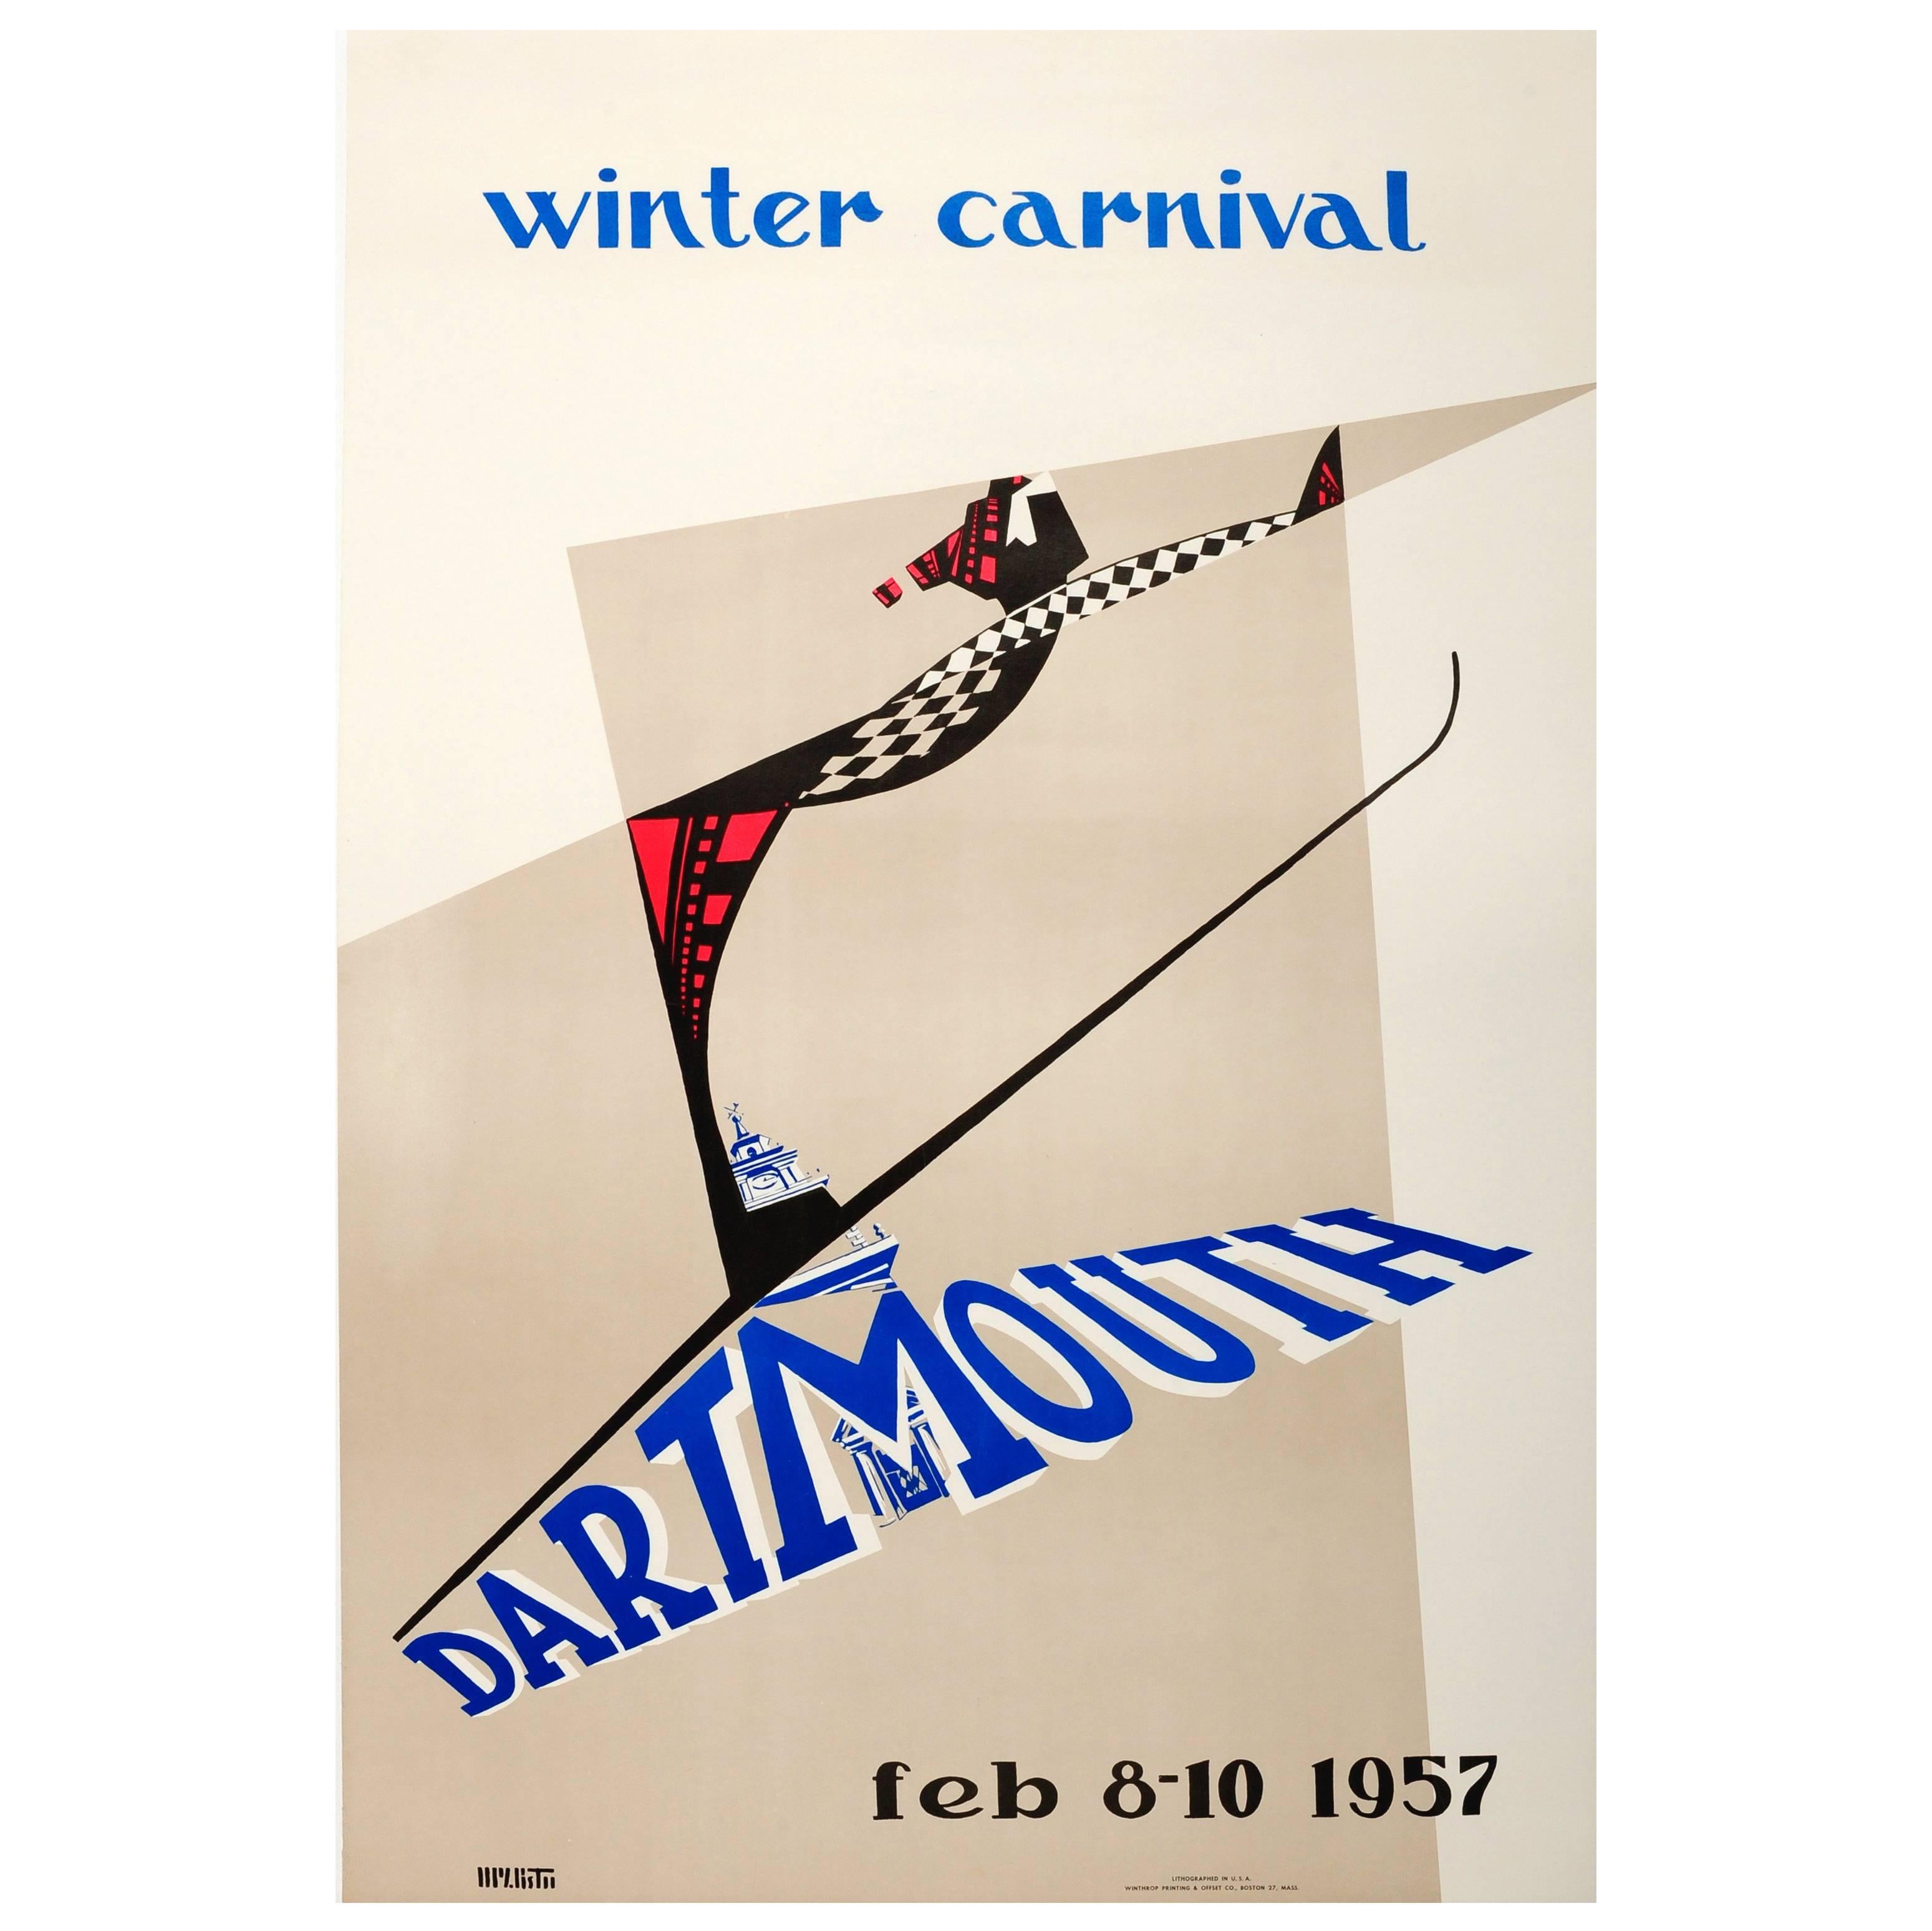 Original Vintage Skiing Event Poster for the Annual Dartmouth Winter Carnival